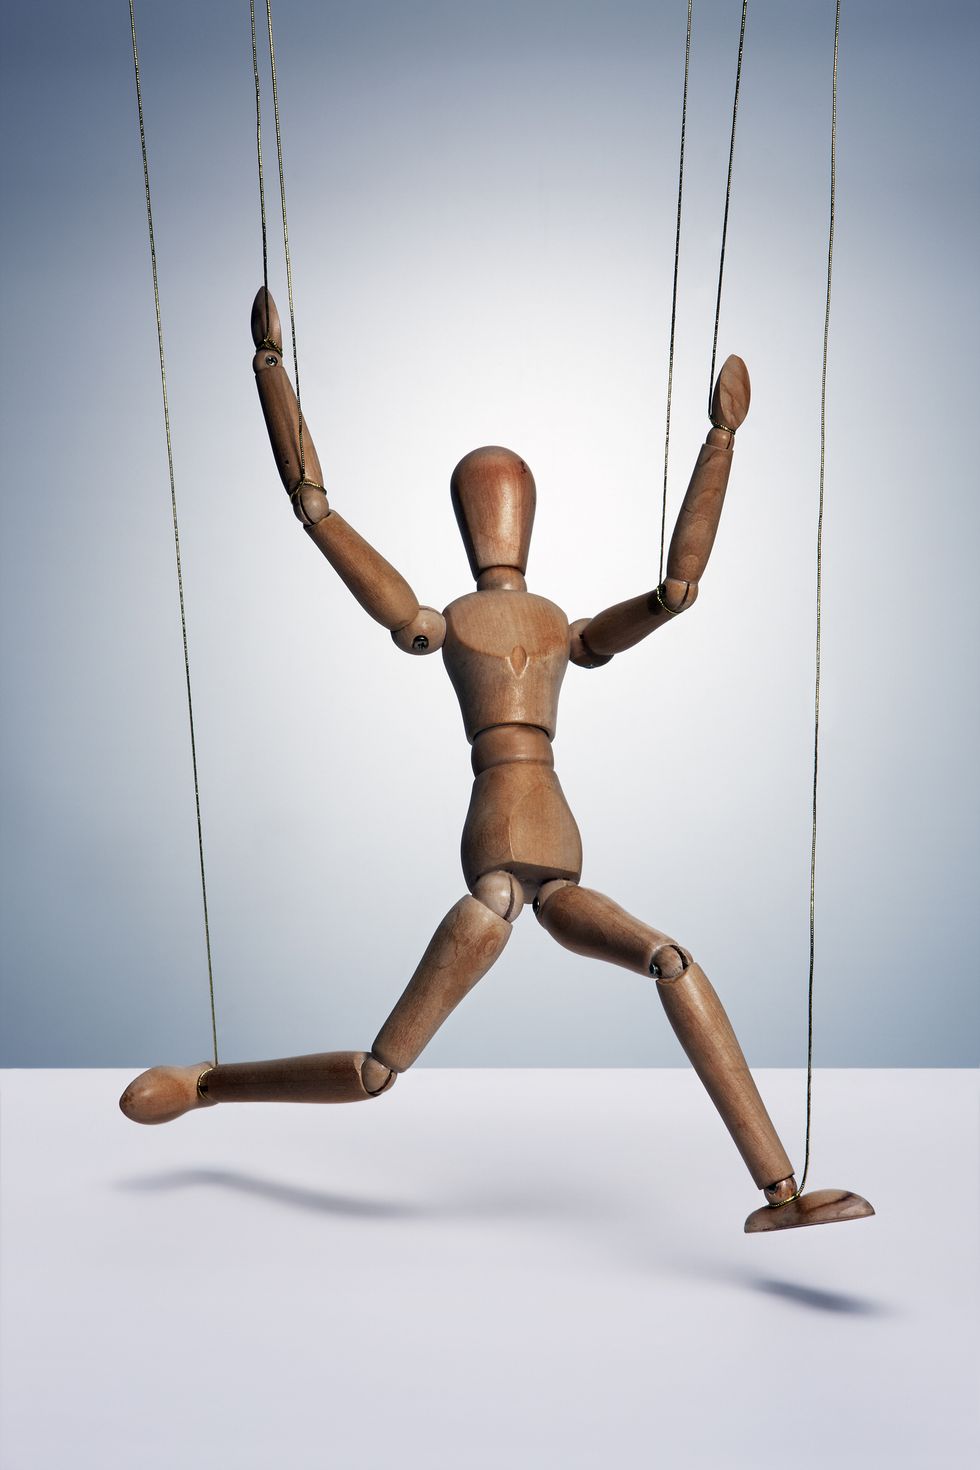 a wooden man controlled by strings